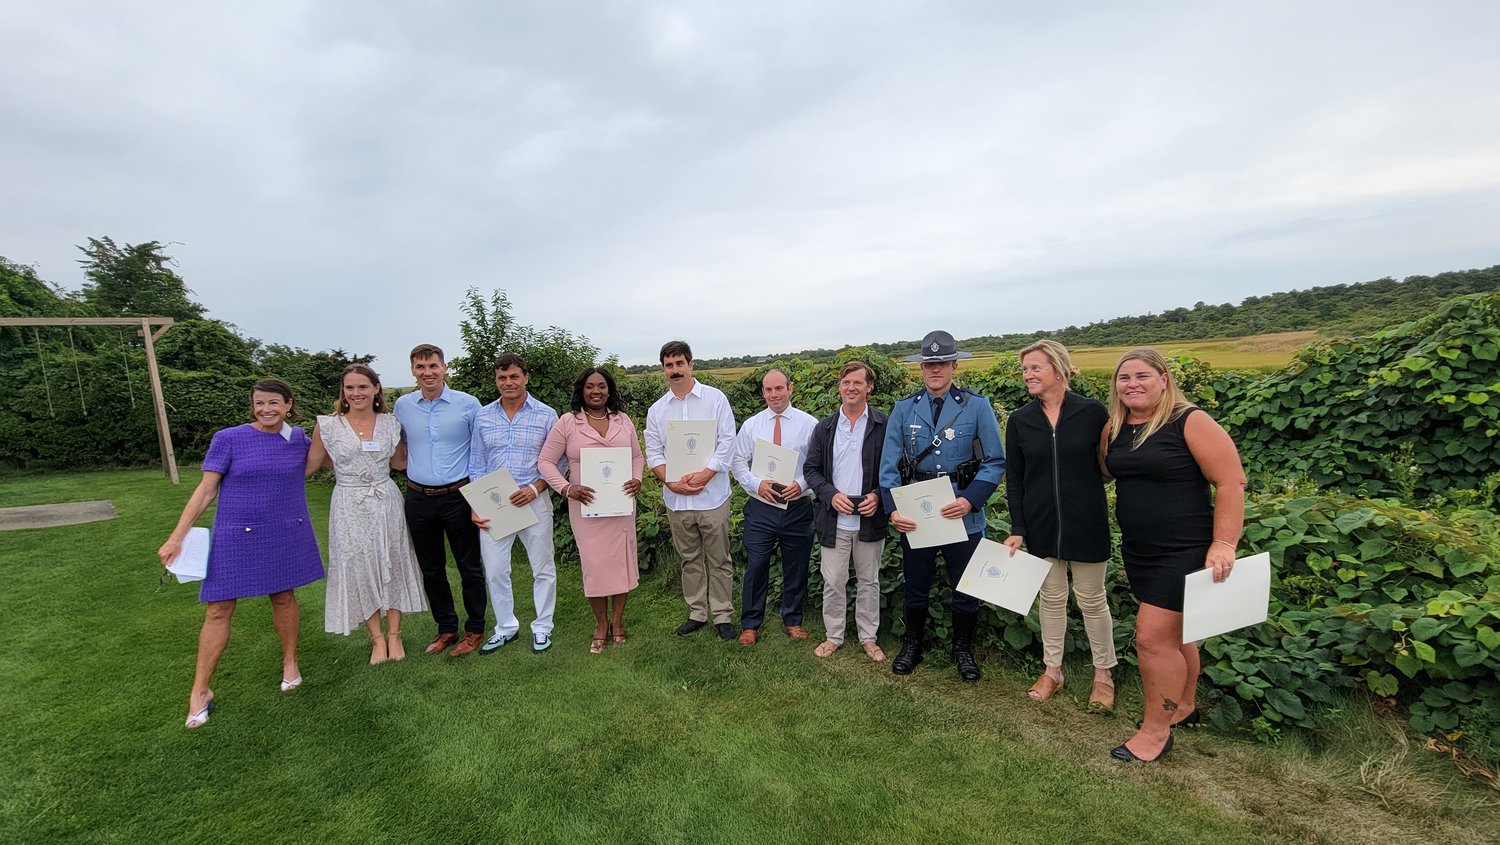 Nantucket’s 2022 Lifesavers Recognition Day was held Sunday. From left: Jessica Guff and Carlisle Jensen of the Egan Maritime Institute, state Rep. Dylan Fernandes, Peter Georgantas, Venessa Smith, Nate Barber, Nantucket police officer Joseph Tirone, Dan MacKeigan, state trooper Robert Clouse, Sheila MacKeigan and Jennifer Decker. The MacKeigans accepted the Maurice E. Gibbs Commendation Award on behalf of their daughter Sydney.